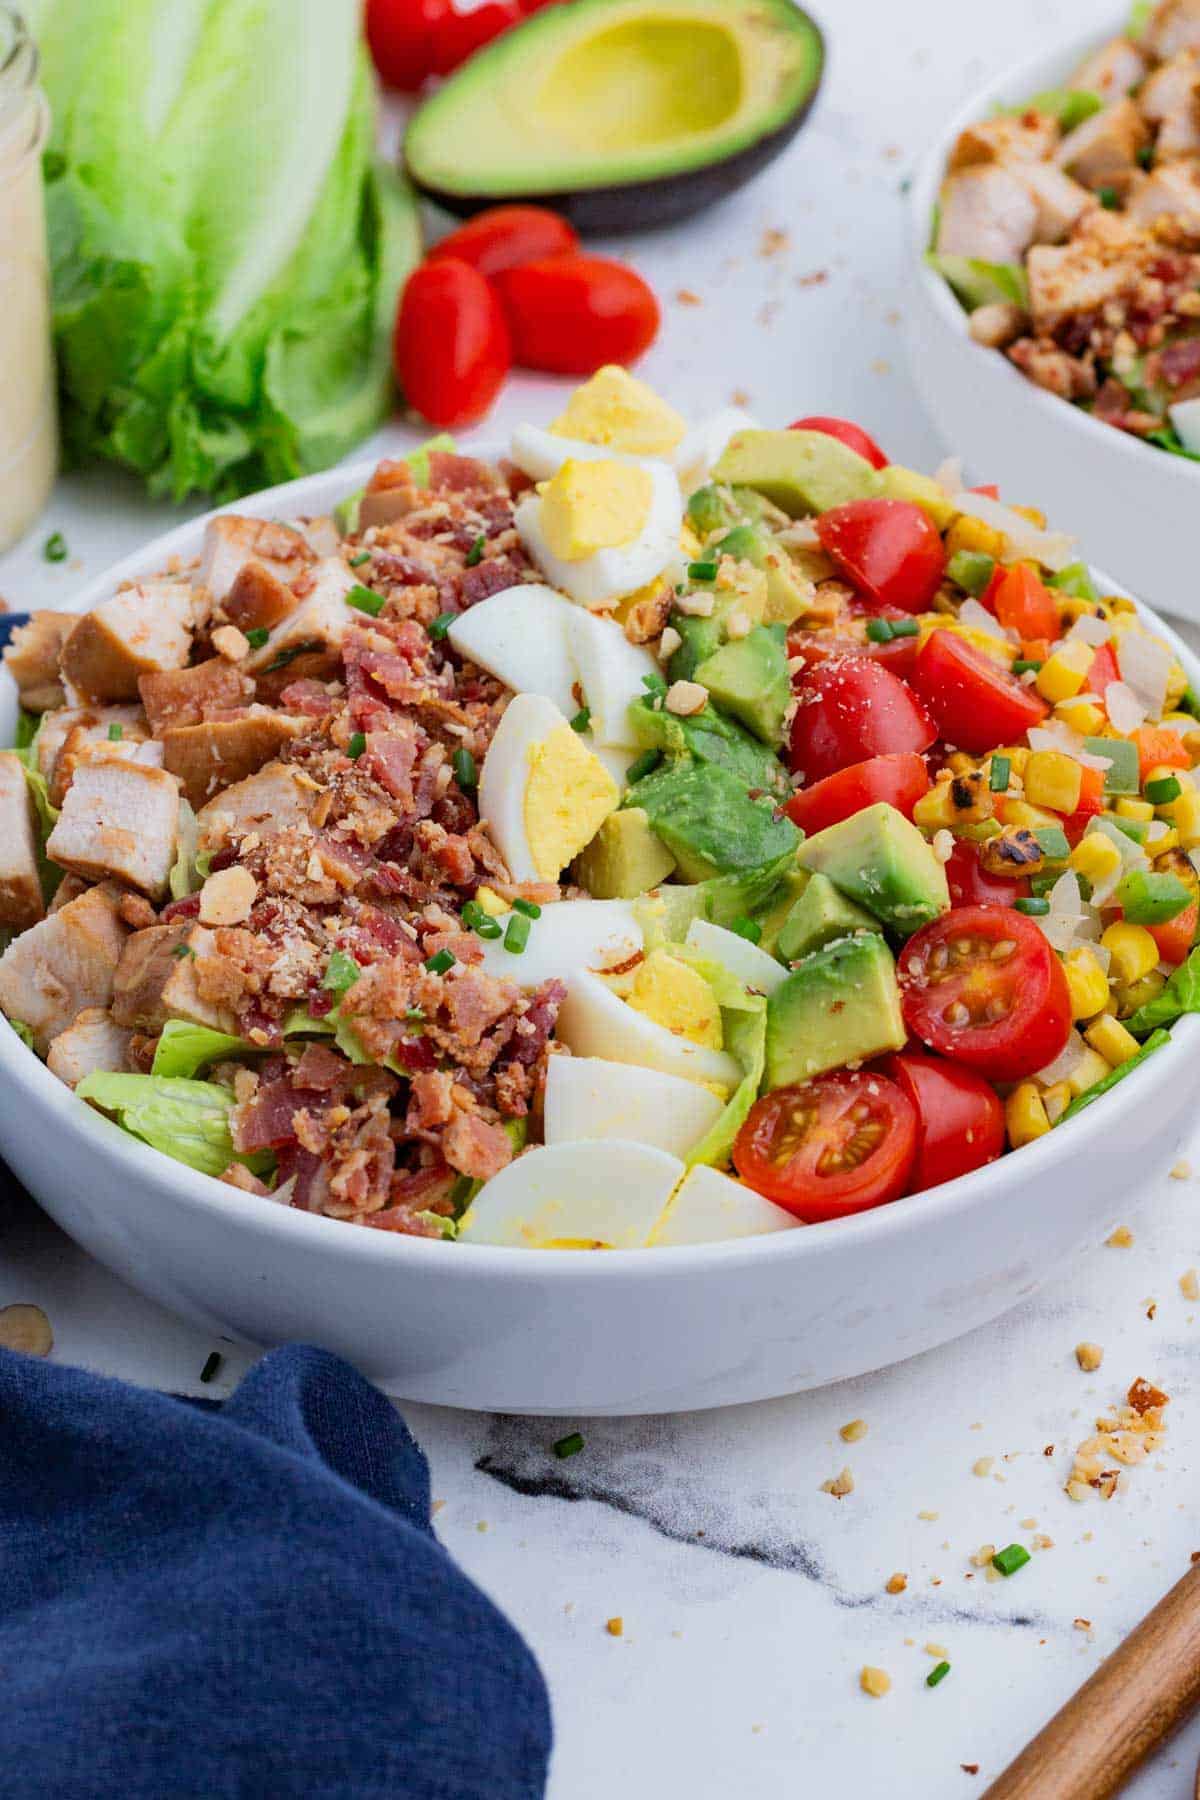 A Chicken Cobb Salad in a white bowl on a table.